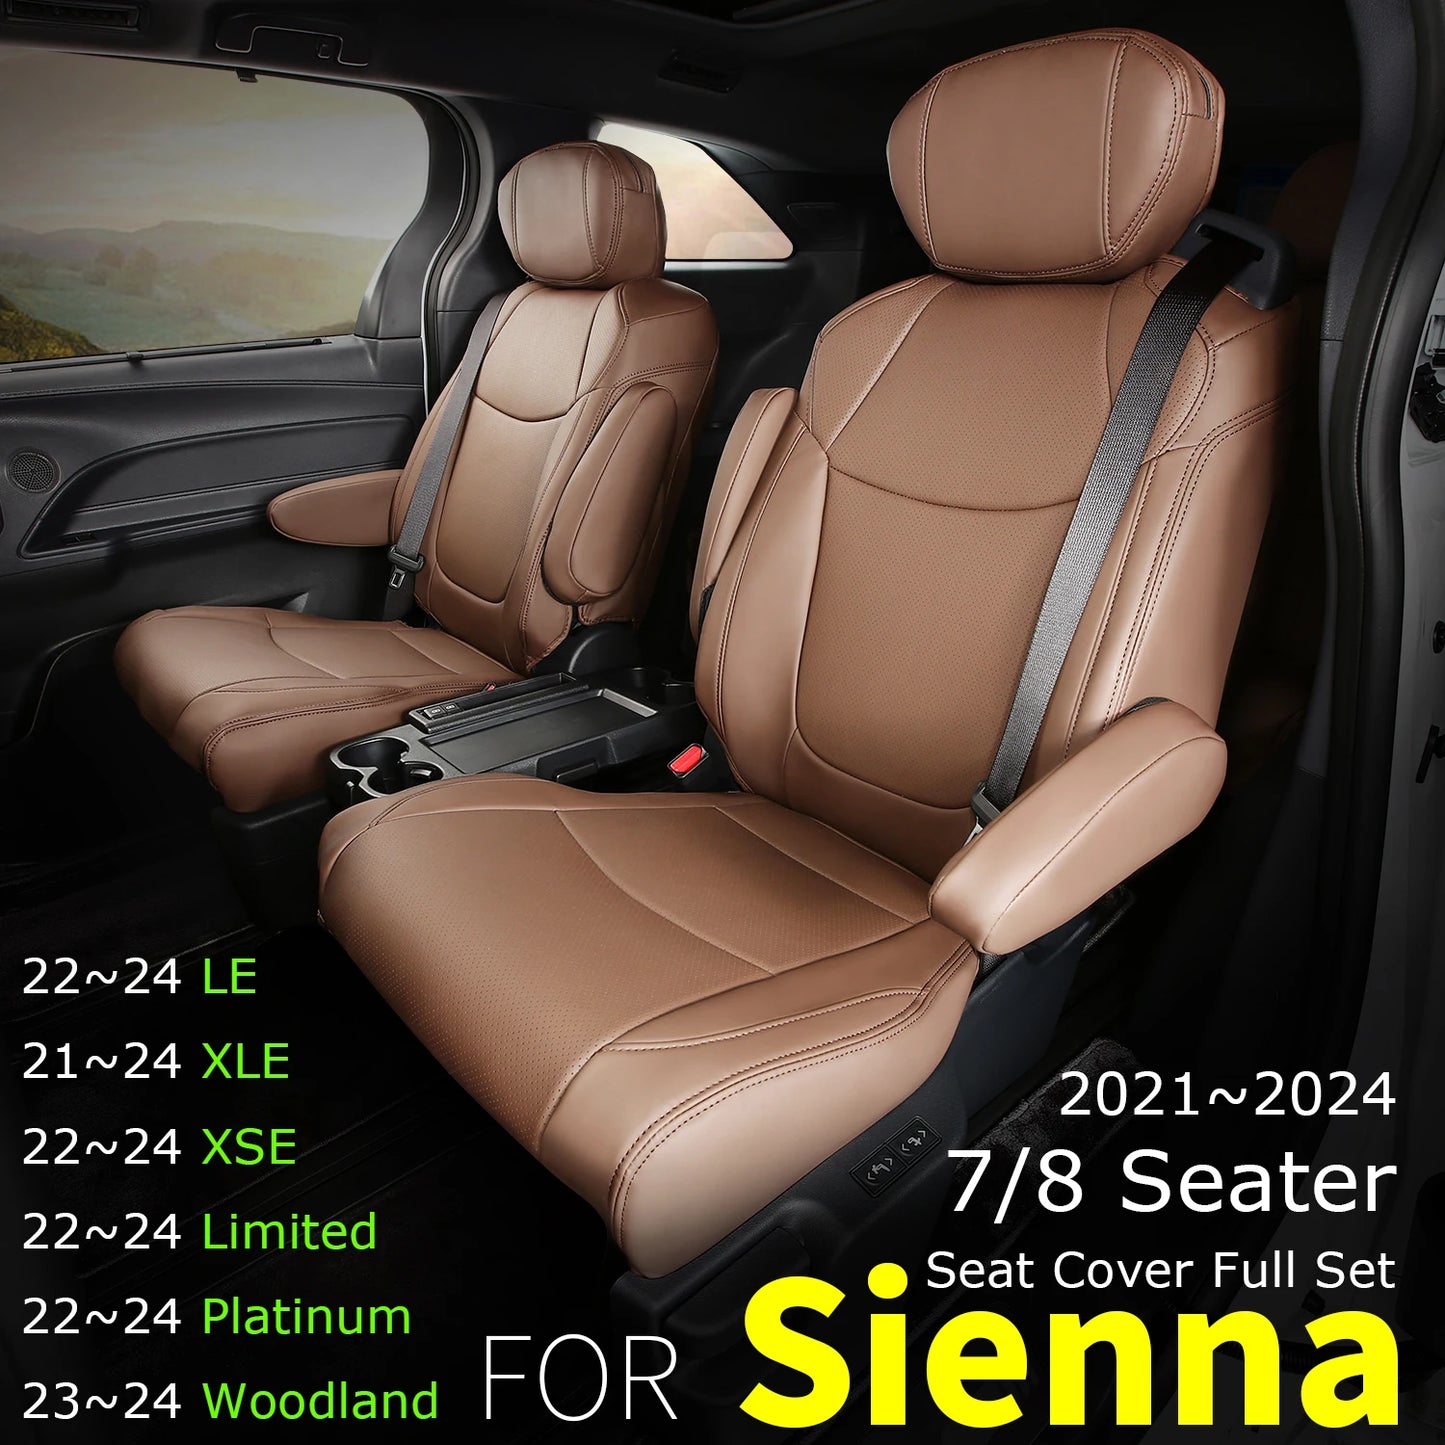 Suitable for Toyota Sienna 2021 2022 2023 2024 car seat covers skin full set truck cover Platinum LE XLE XSE Woodland 7/8 seat